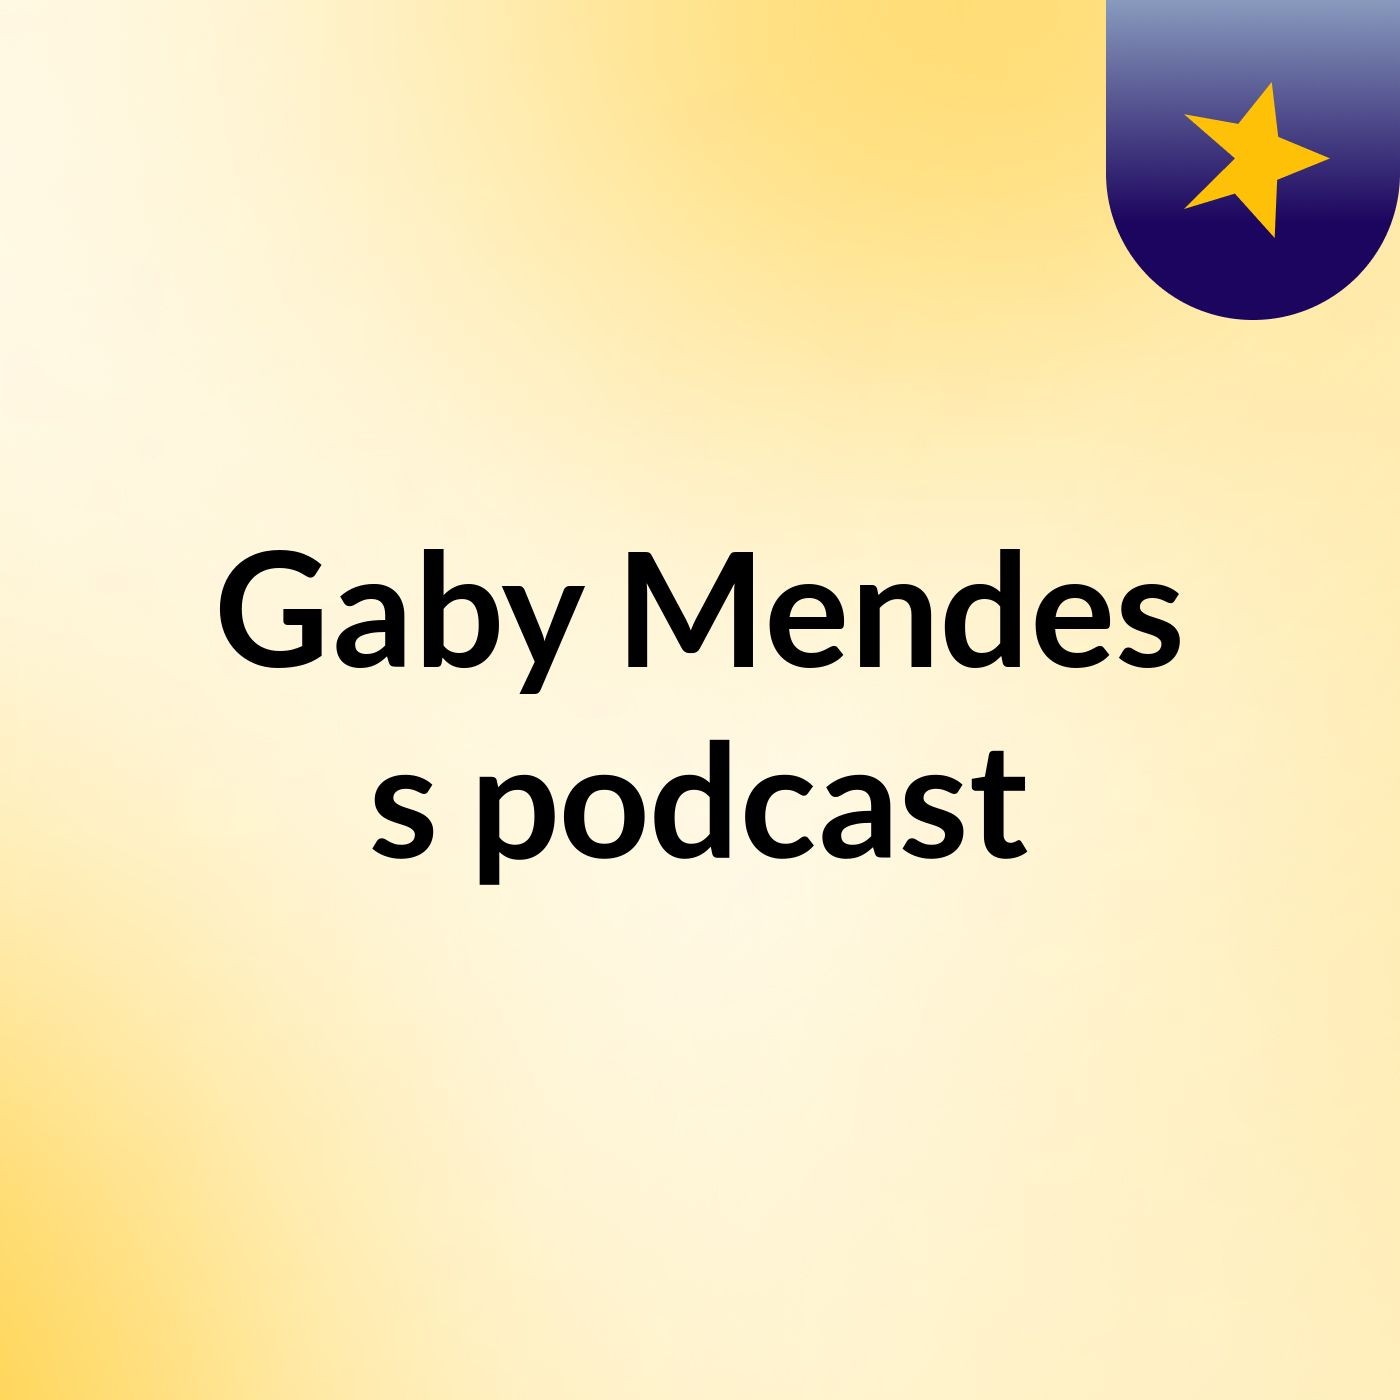 Gaby Mendes's podcast